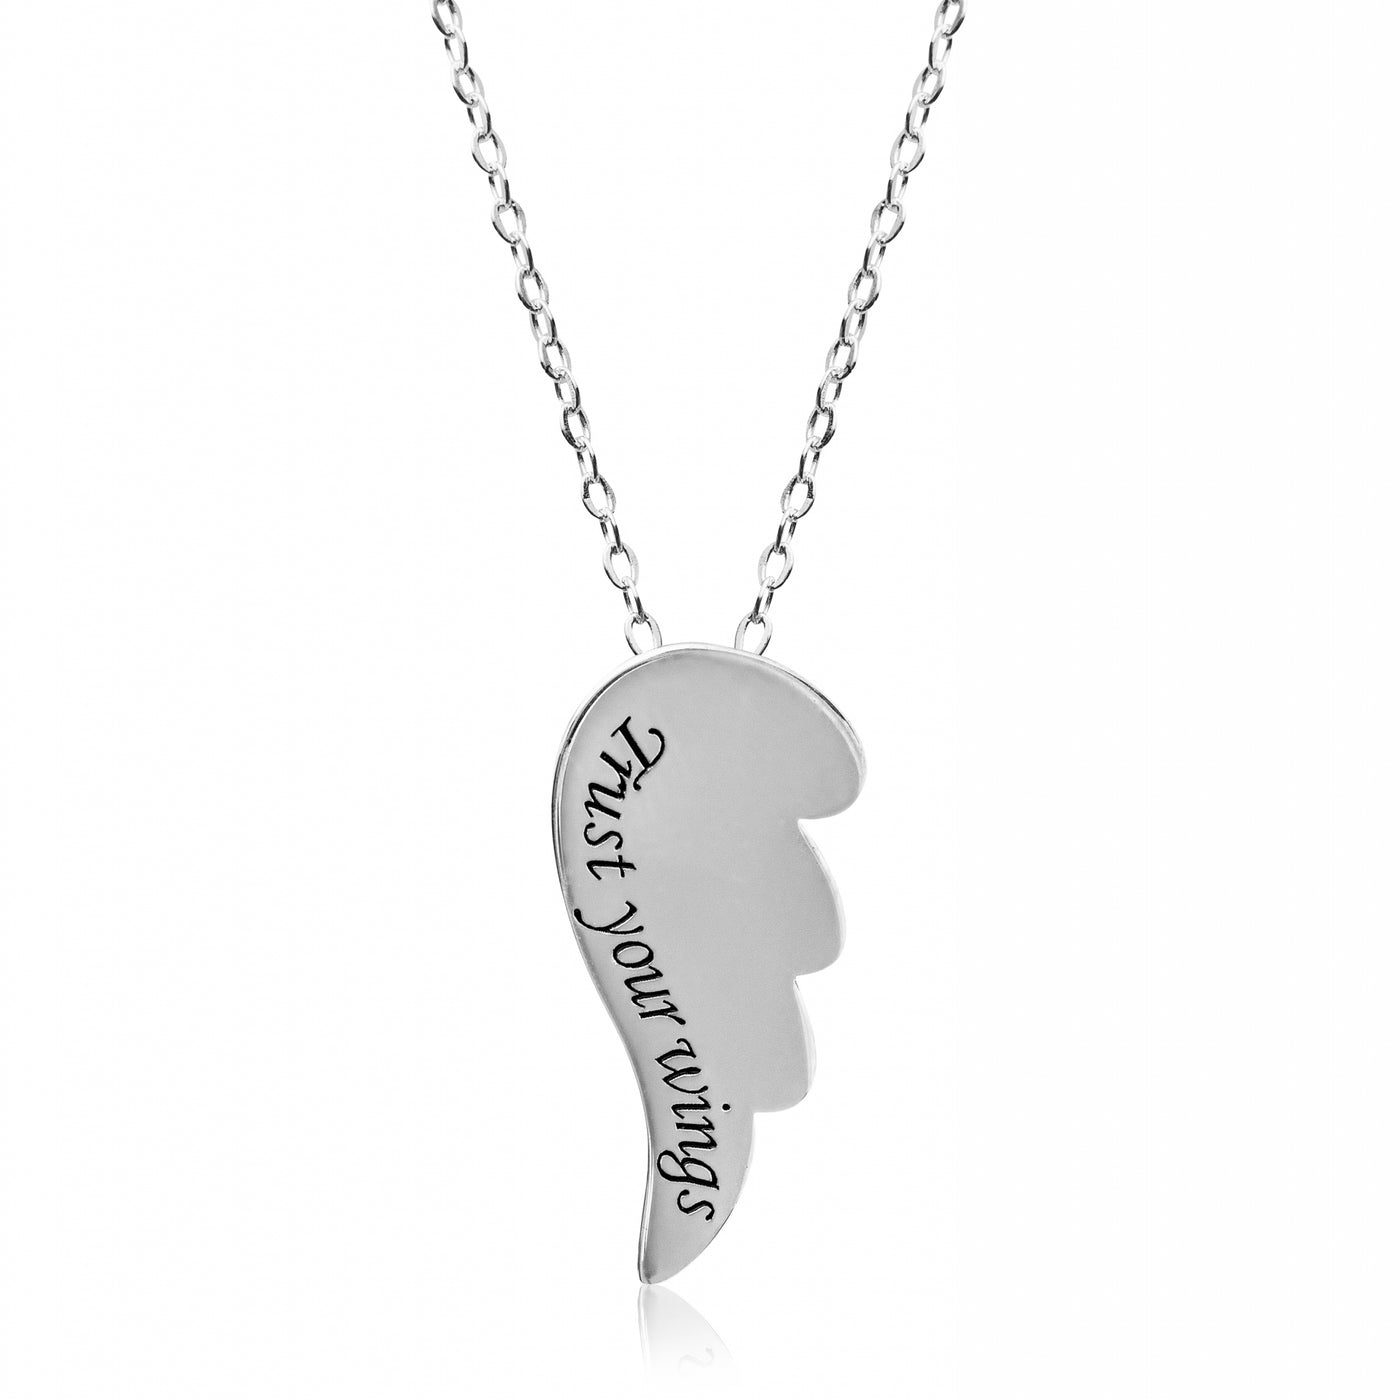 Trust Wings - Necklace